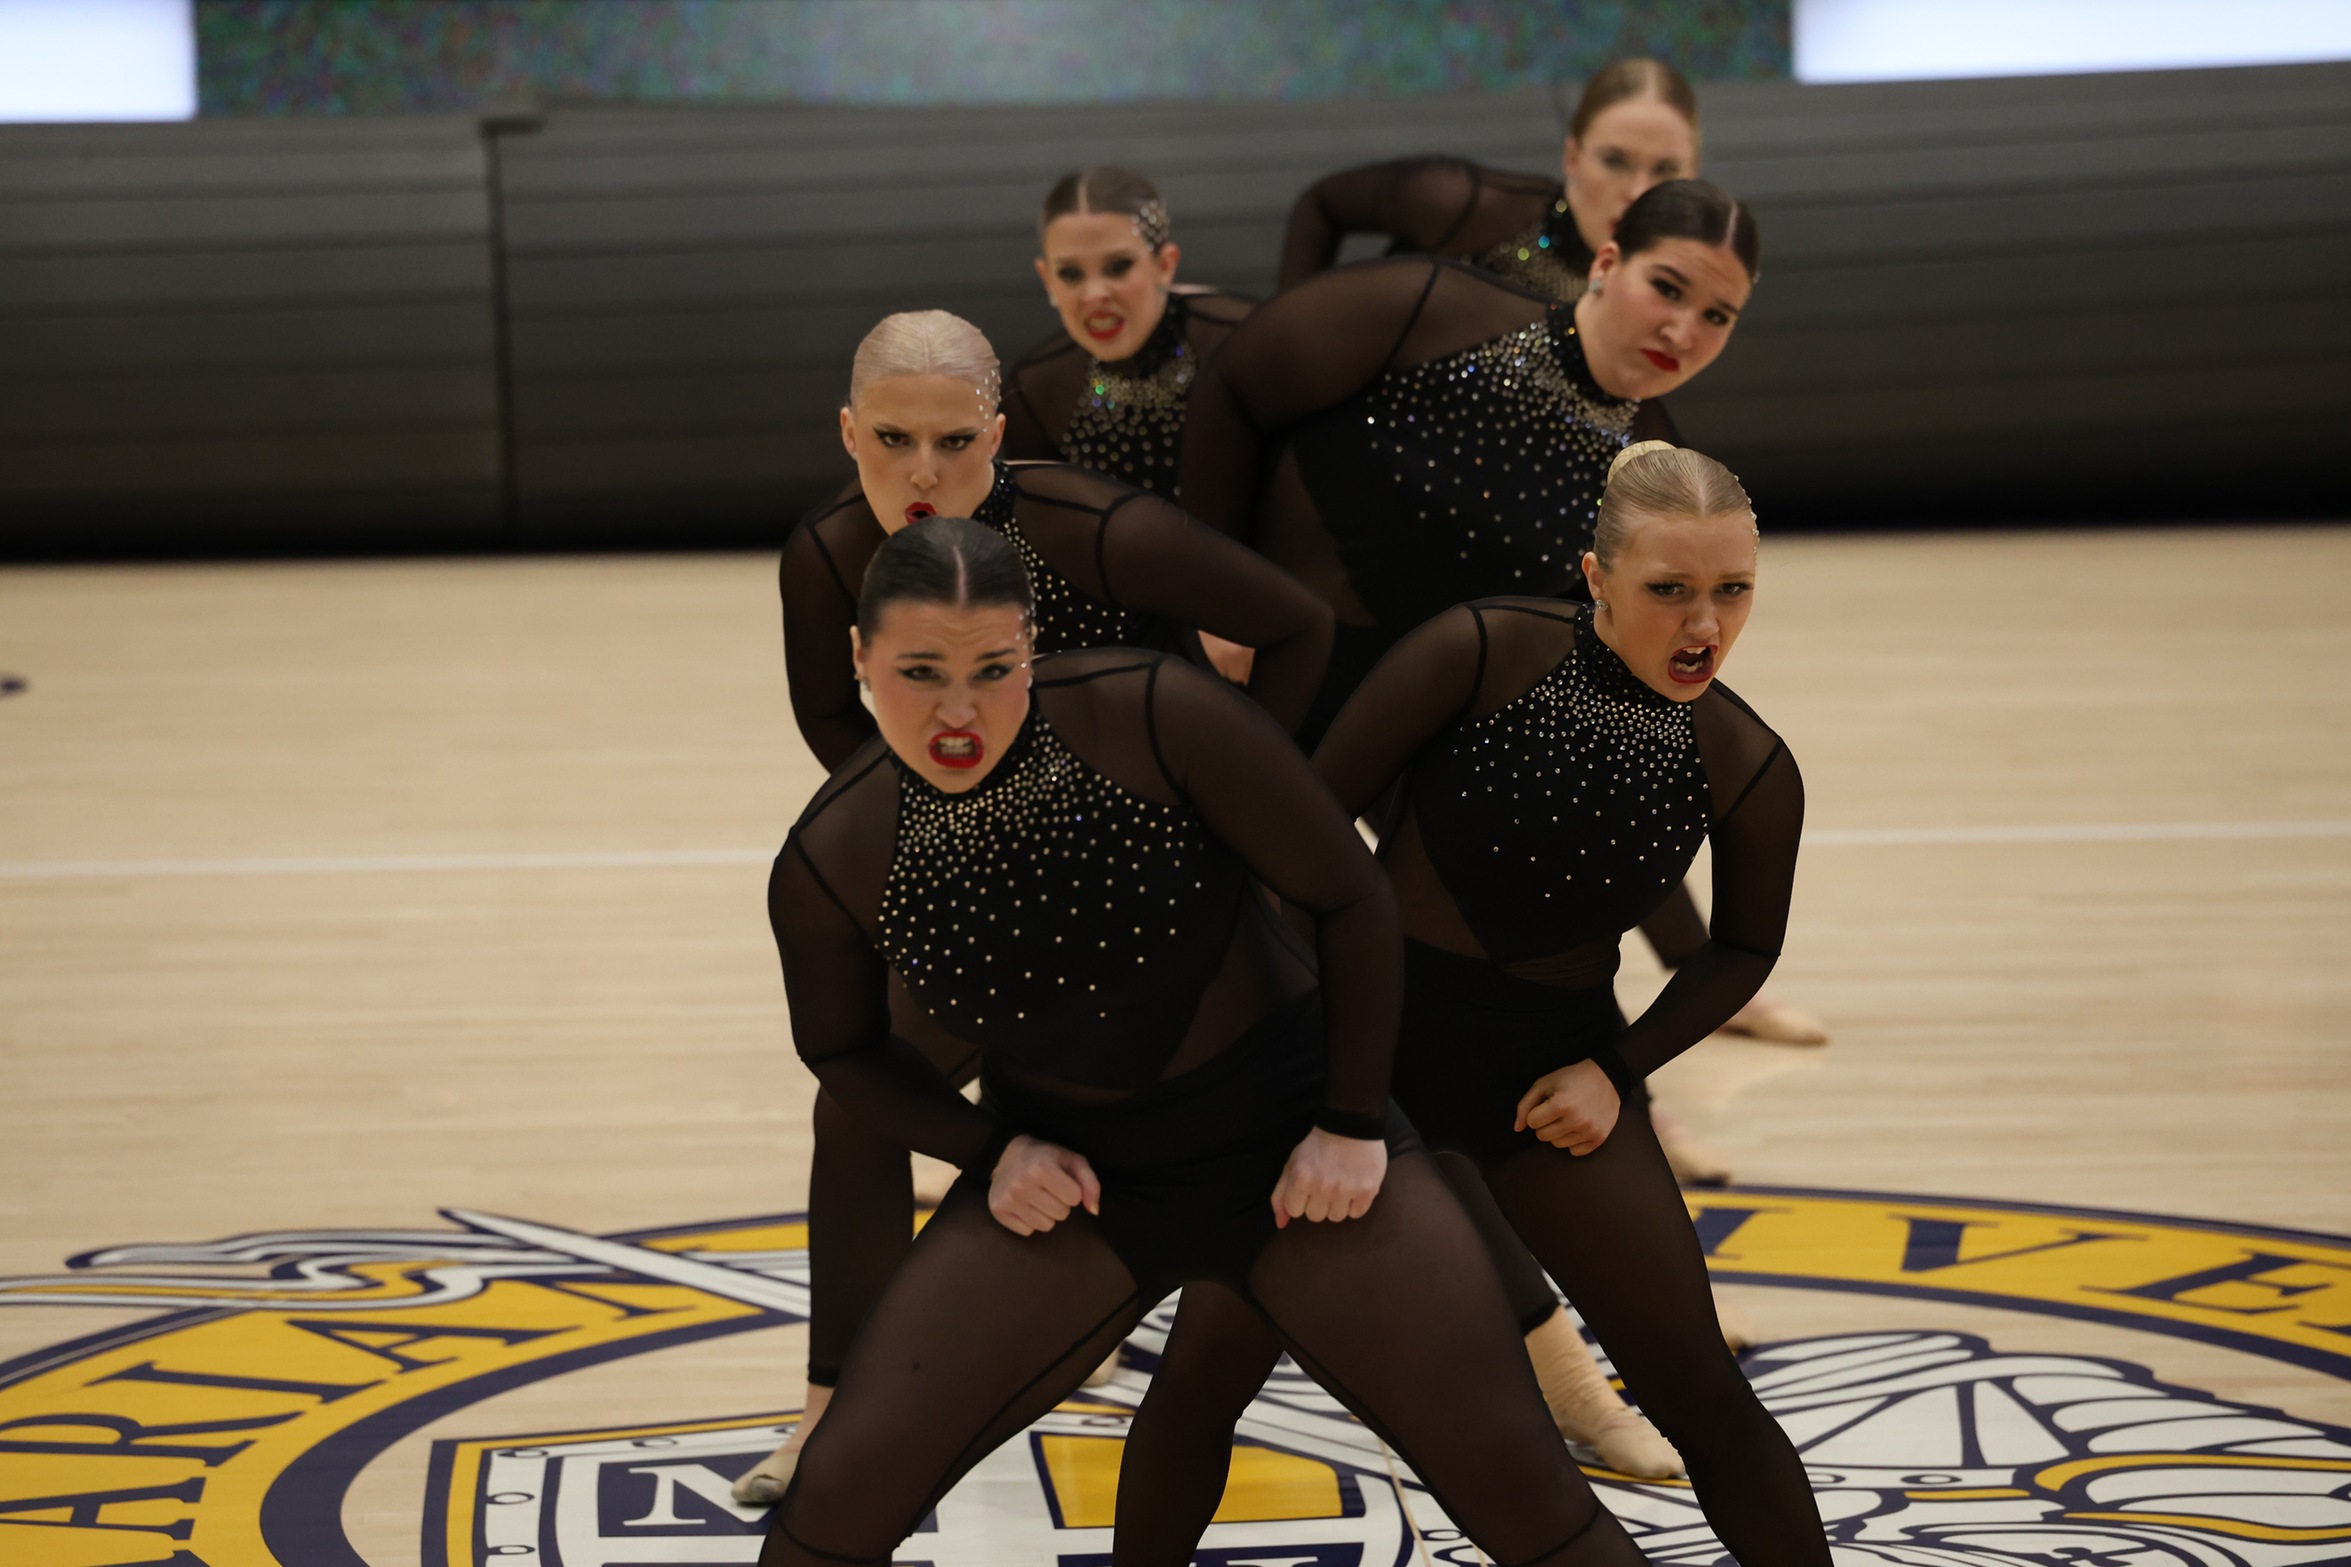 Concordia Dance Team takes second in season opening competitions at Marian